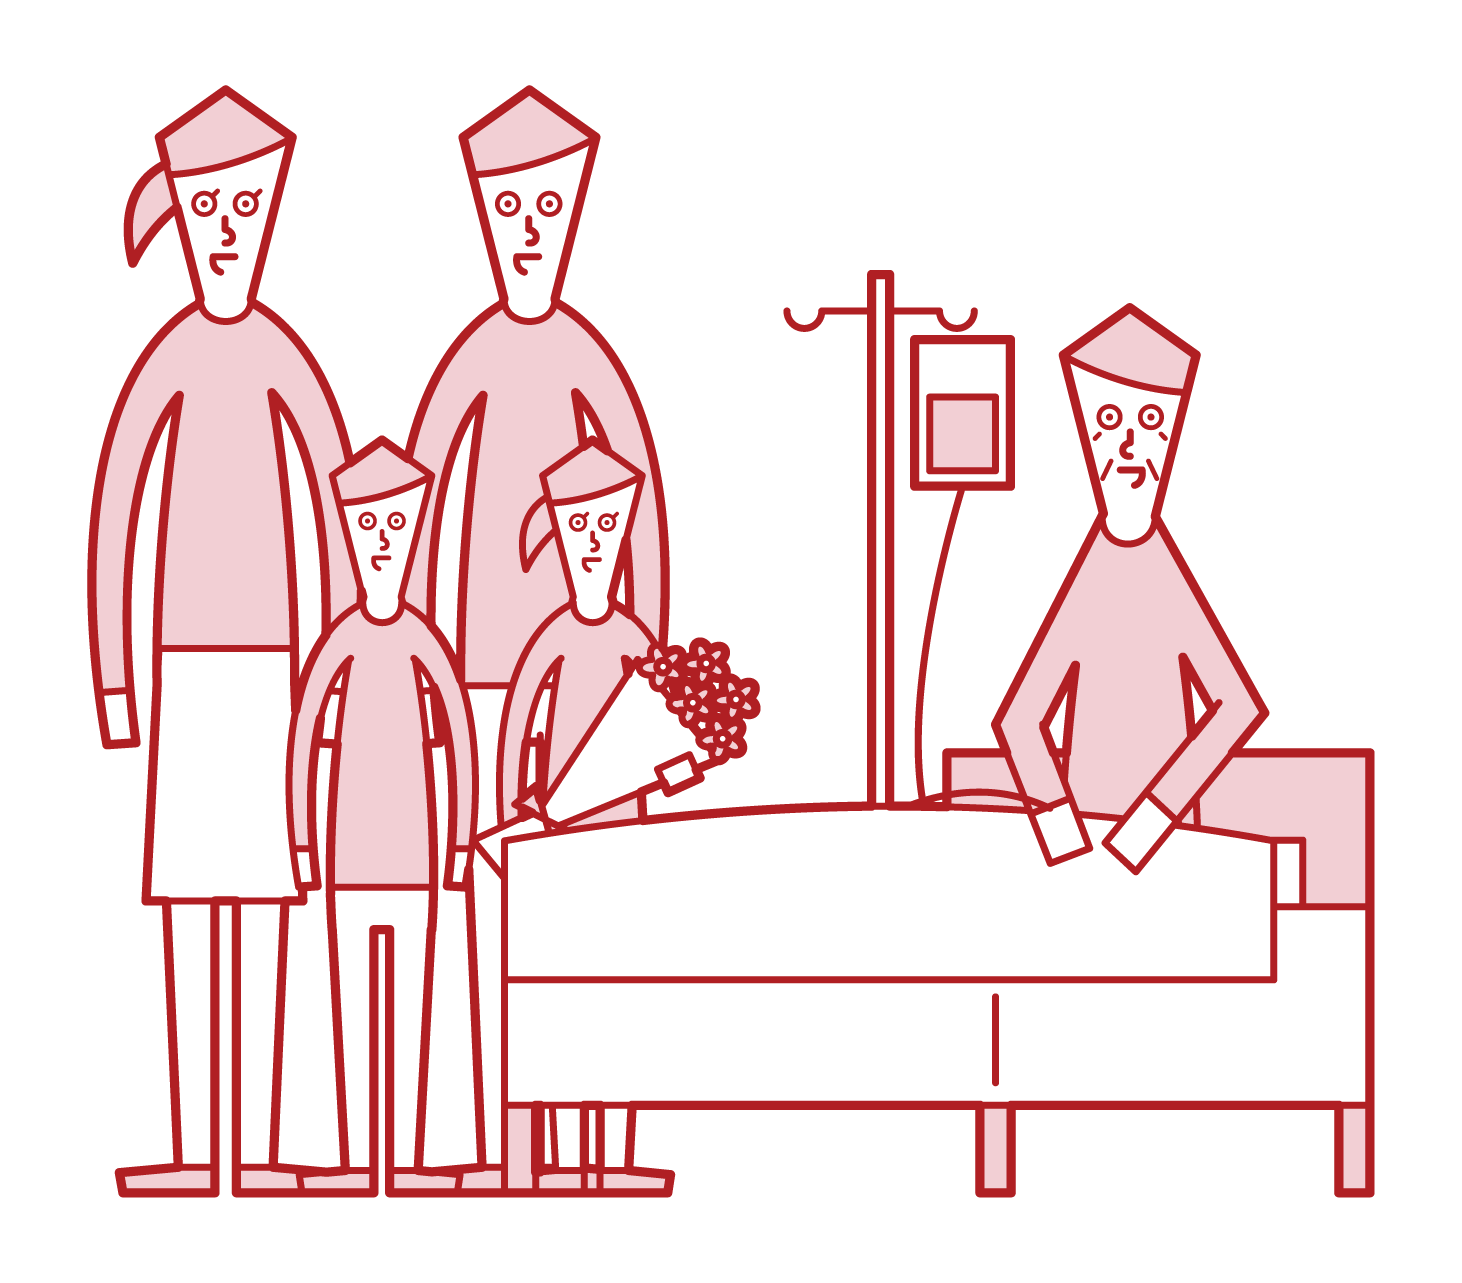 Illustration of a family visiting a hospitalized grandfather